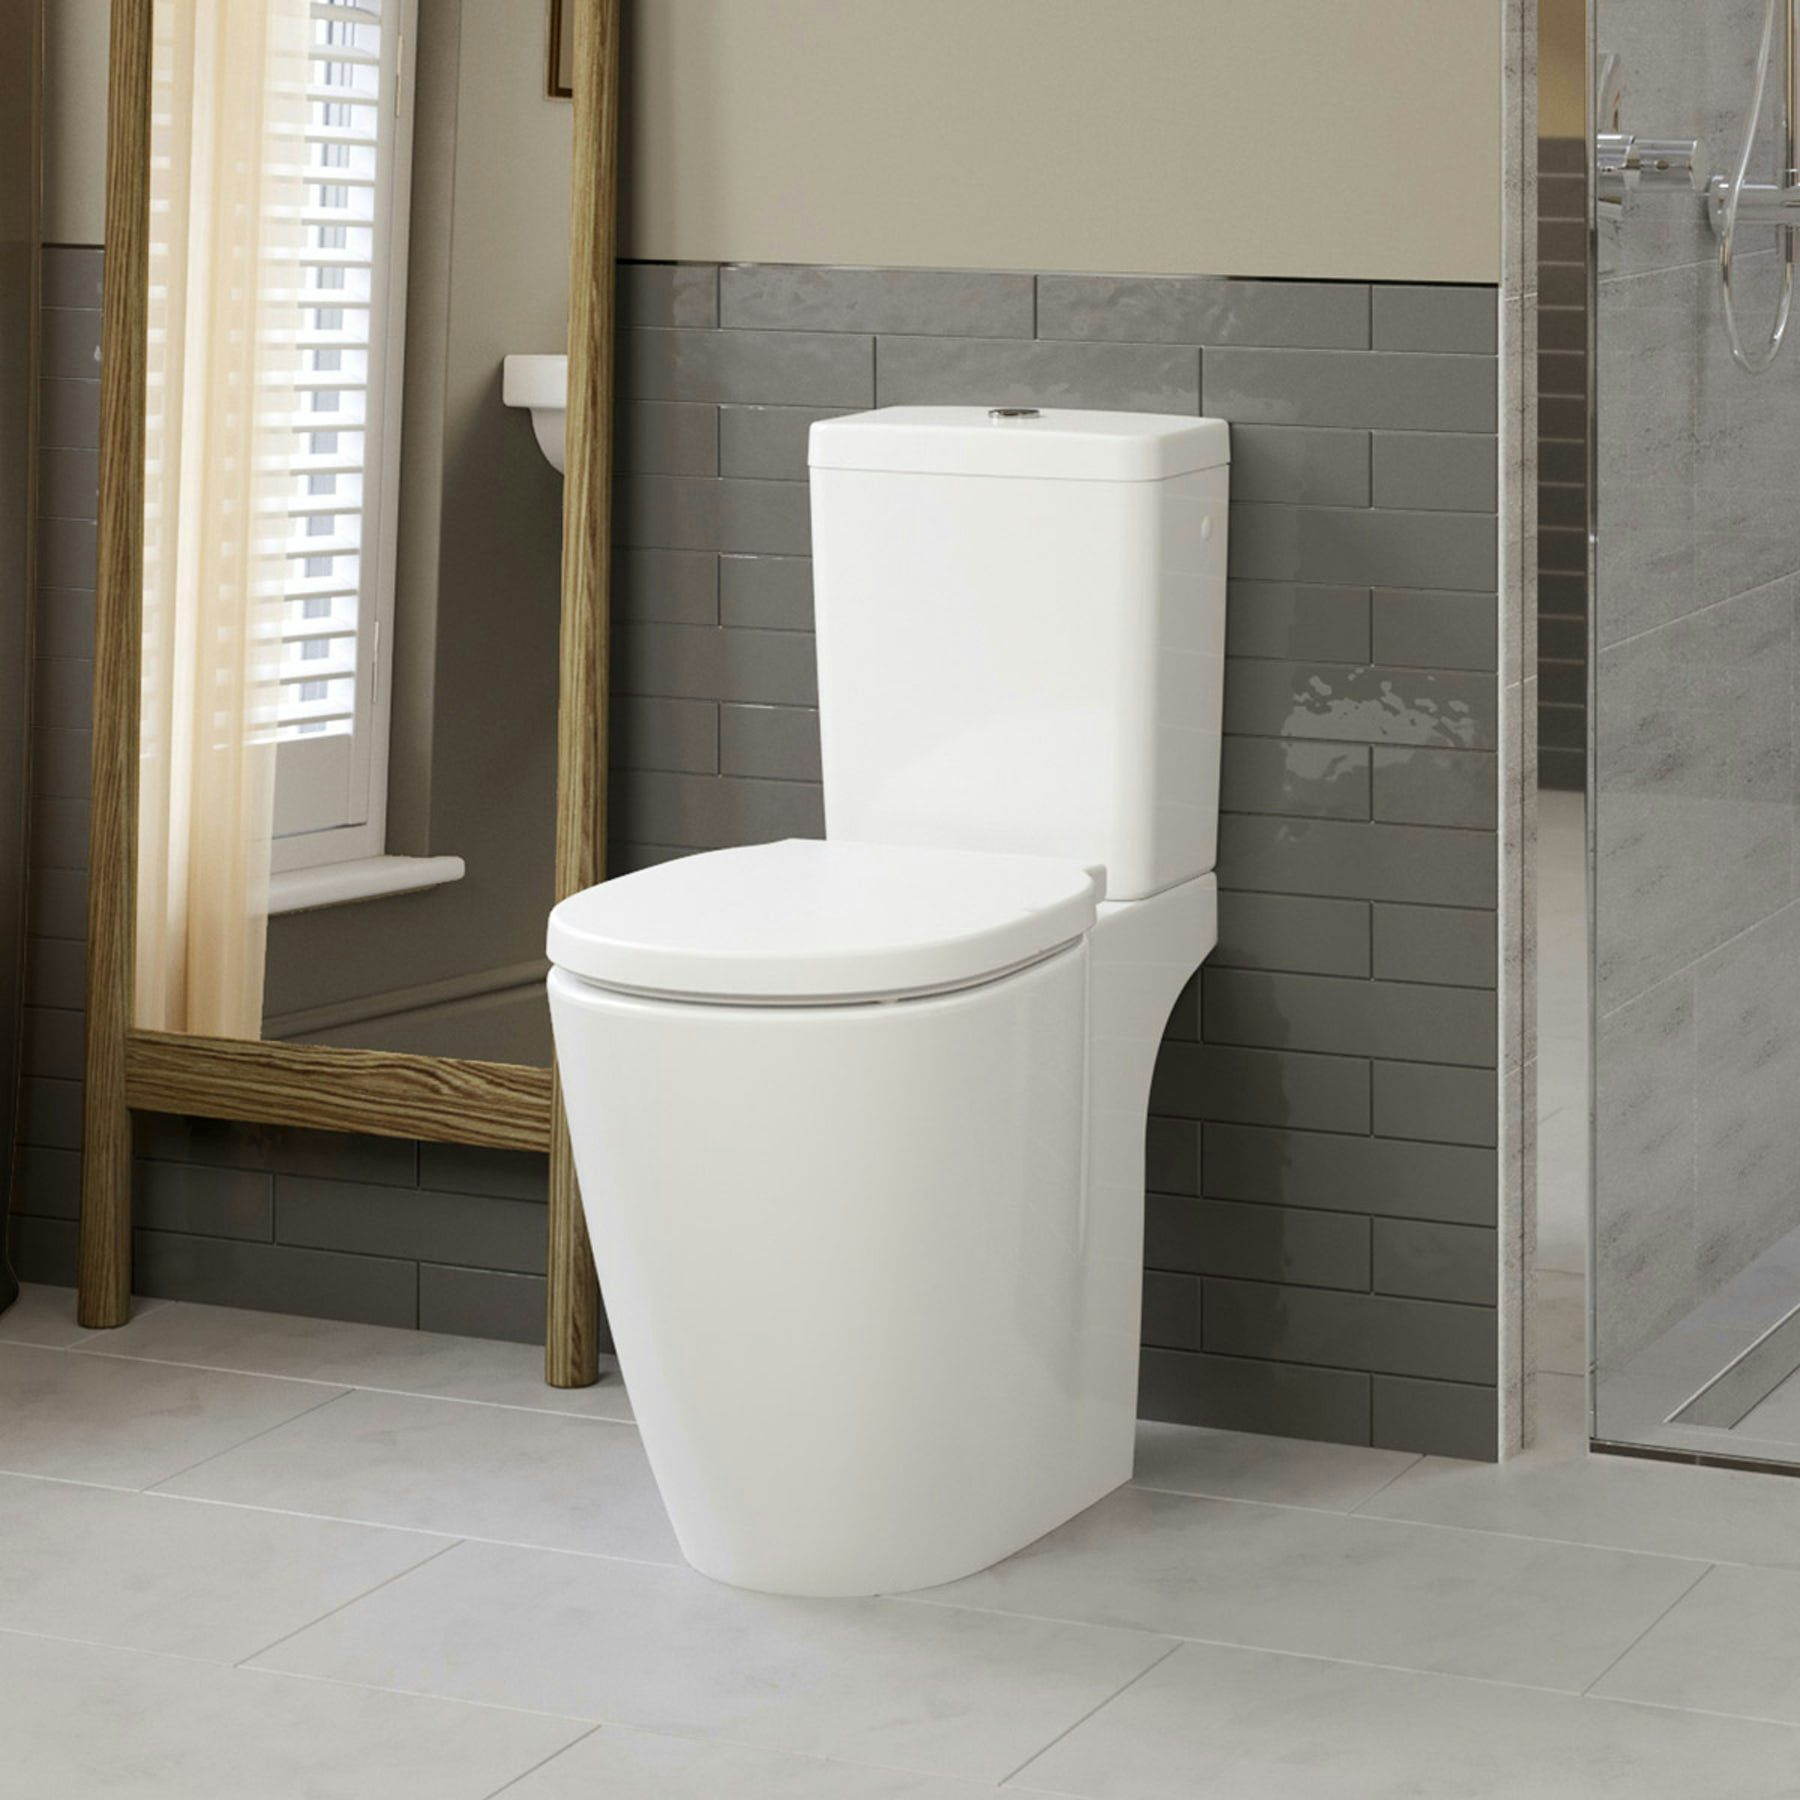 Ideal Standard Concept Freedom Comfort Height Close Coupled Toilet With